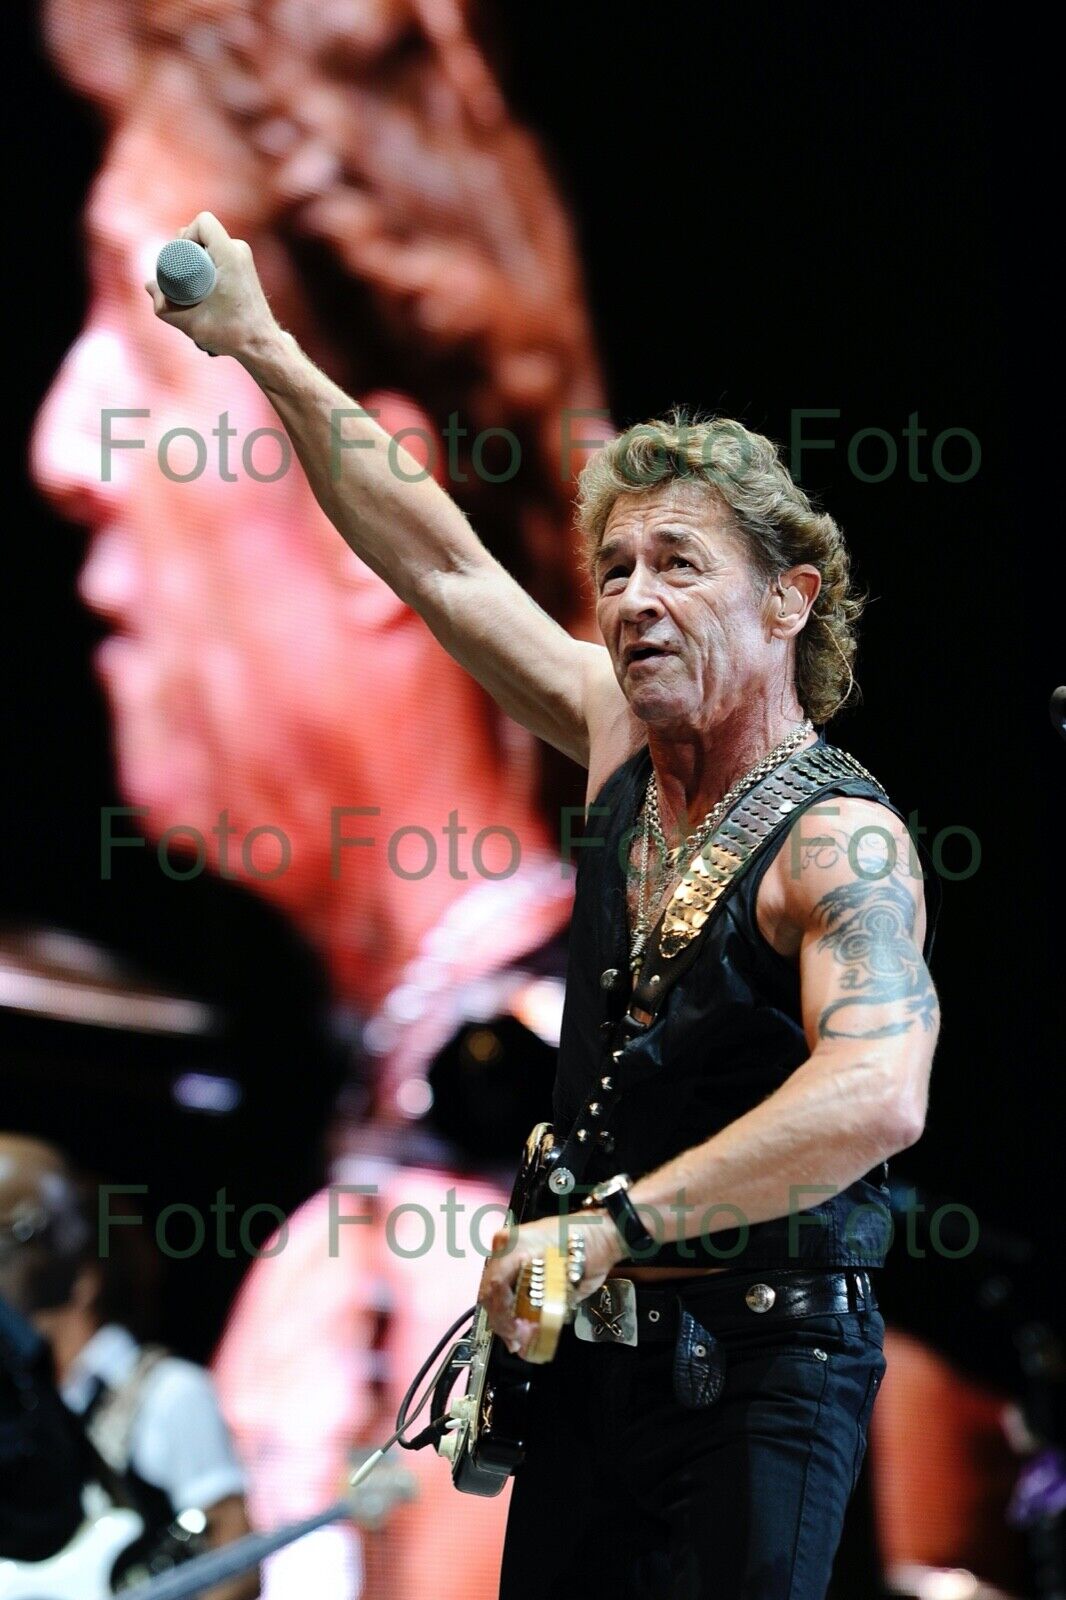 Peter Maffay Rock Pop Songs Music Photo Poster painting 20 X 30 CM Without Autograph (Be-12